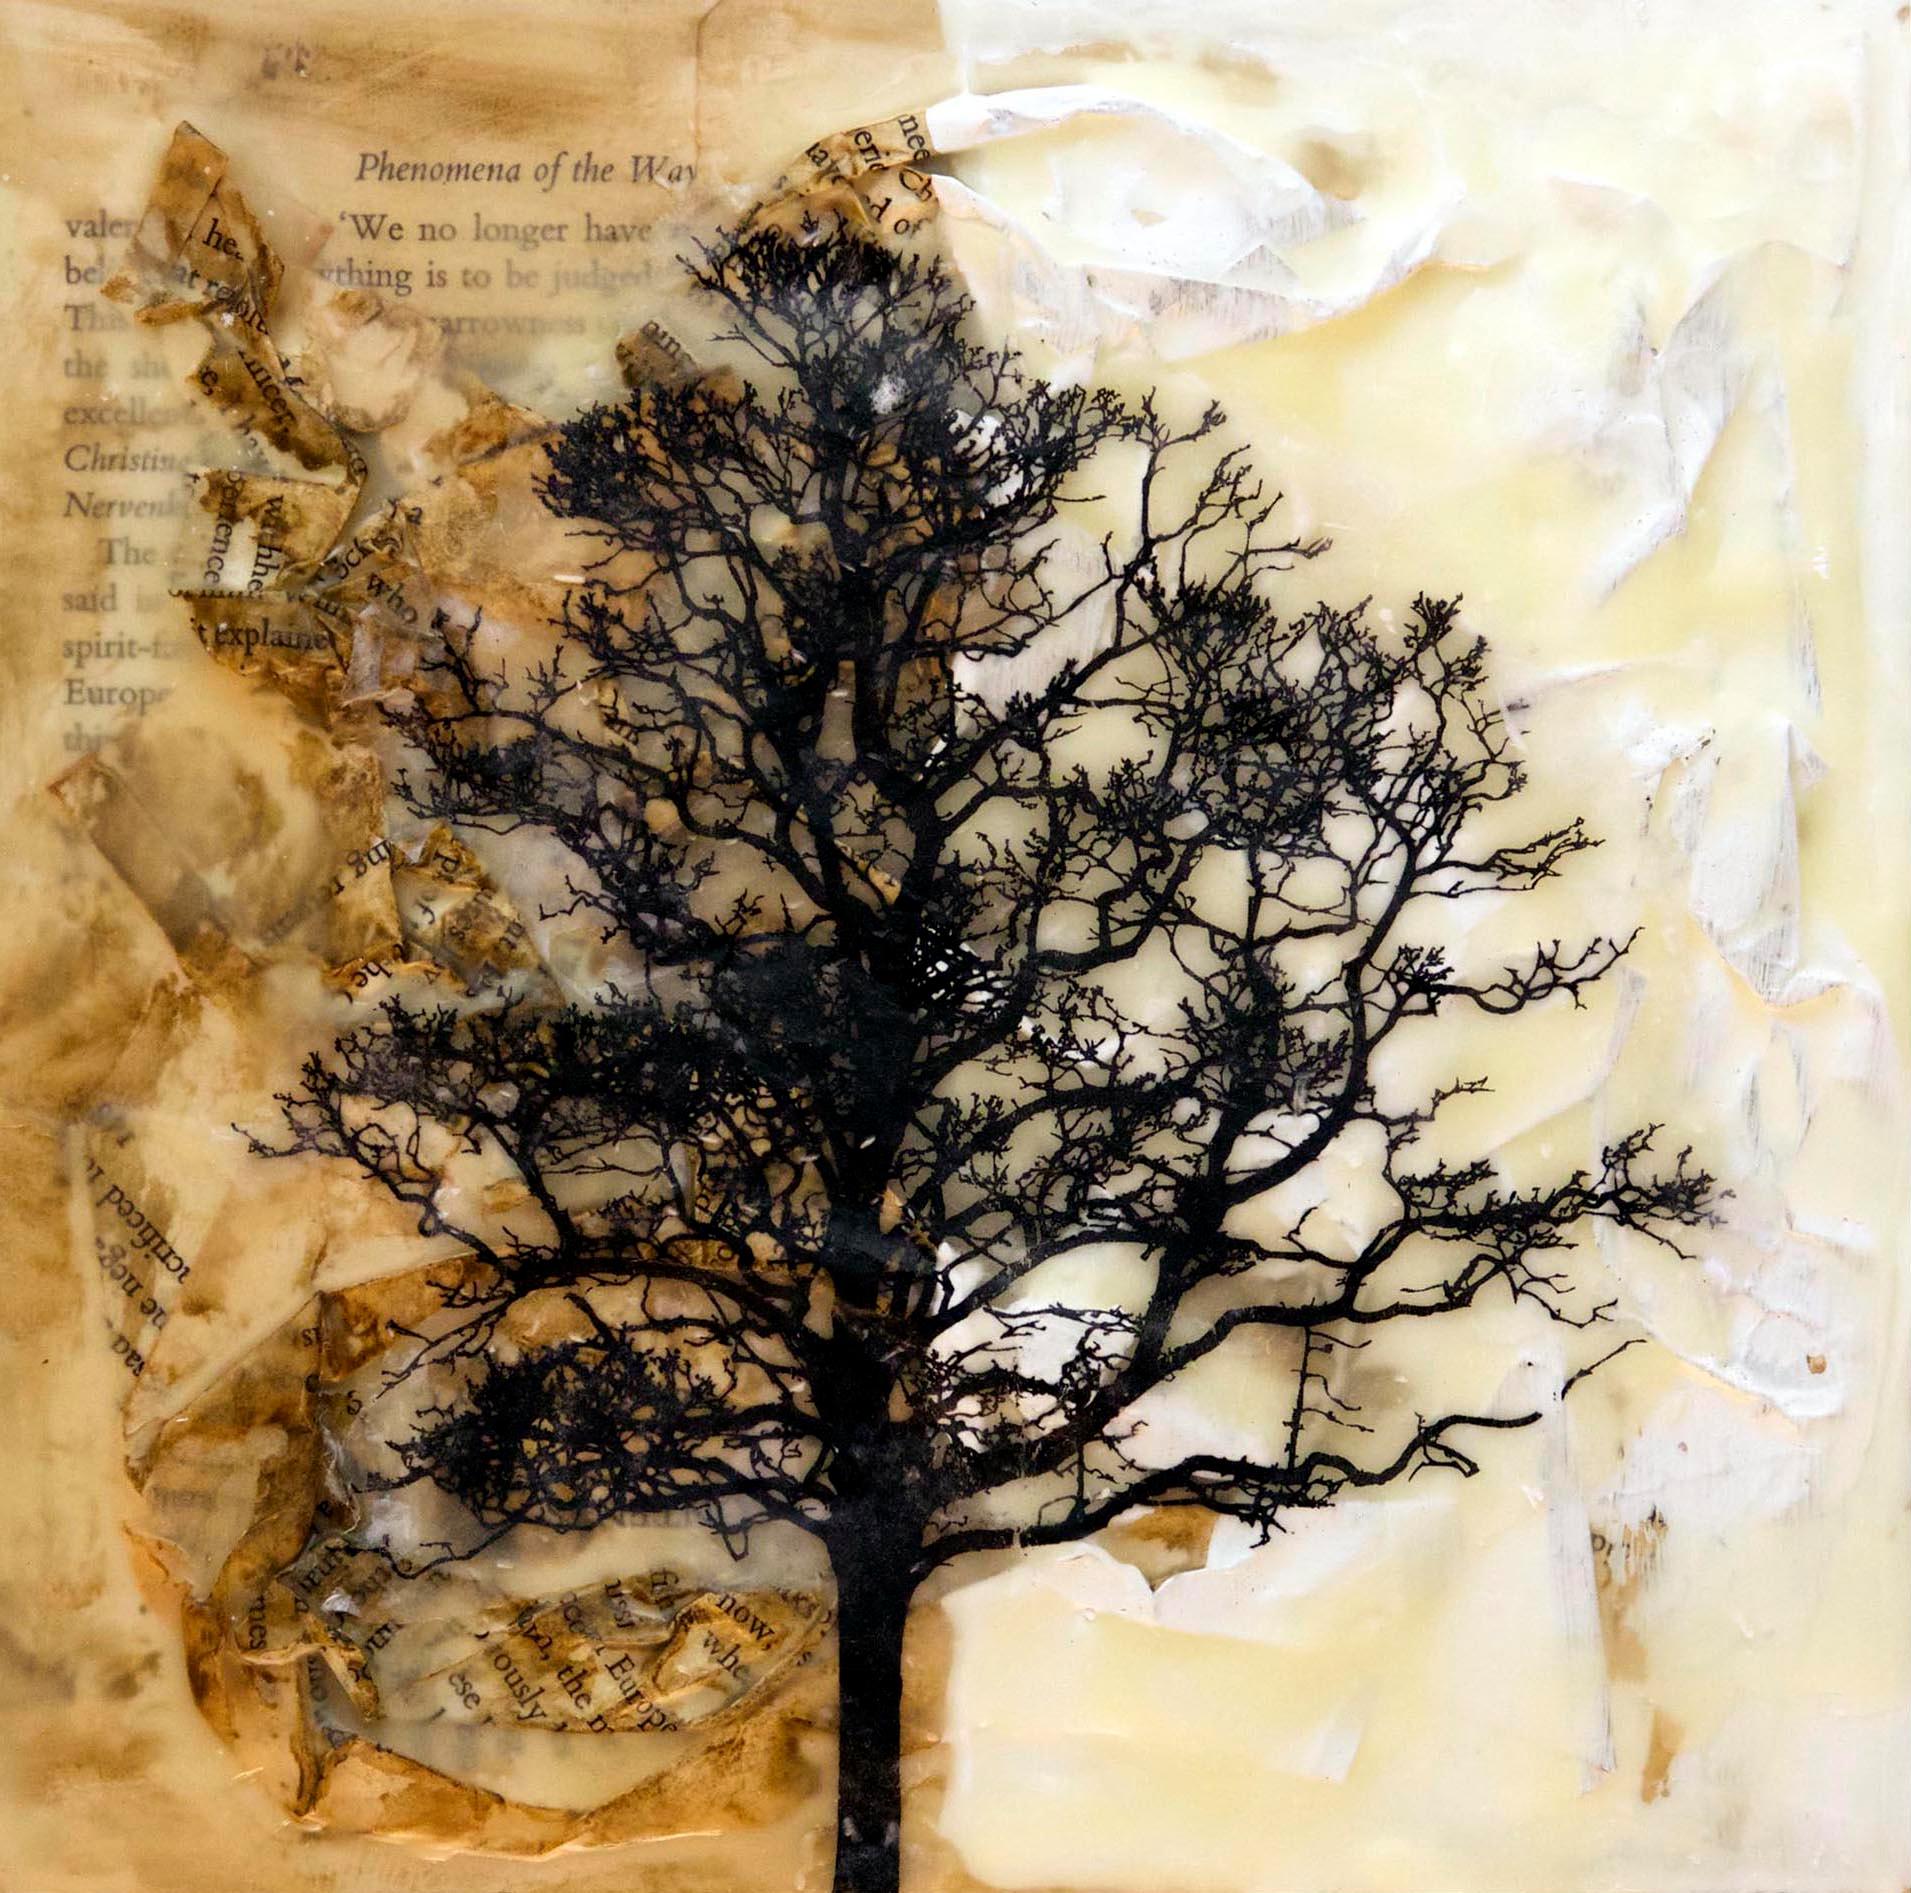 Grounded #23 Adam Nisenson
Encaustic, Paint, Collage (book pages), image transfers on wood
One-of-a-kind
Signed on back
2016
8 in. h x 8 in. w x 1.75 in. d
1 lbs. 0 oz. Artist Comments 
This work has a lot of depth and layers to it due to the